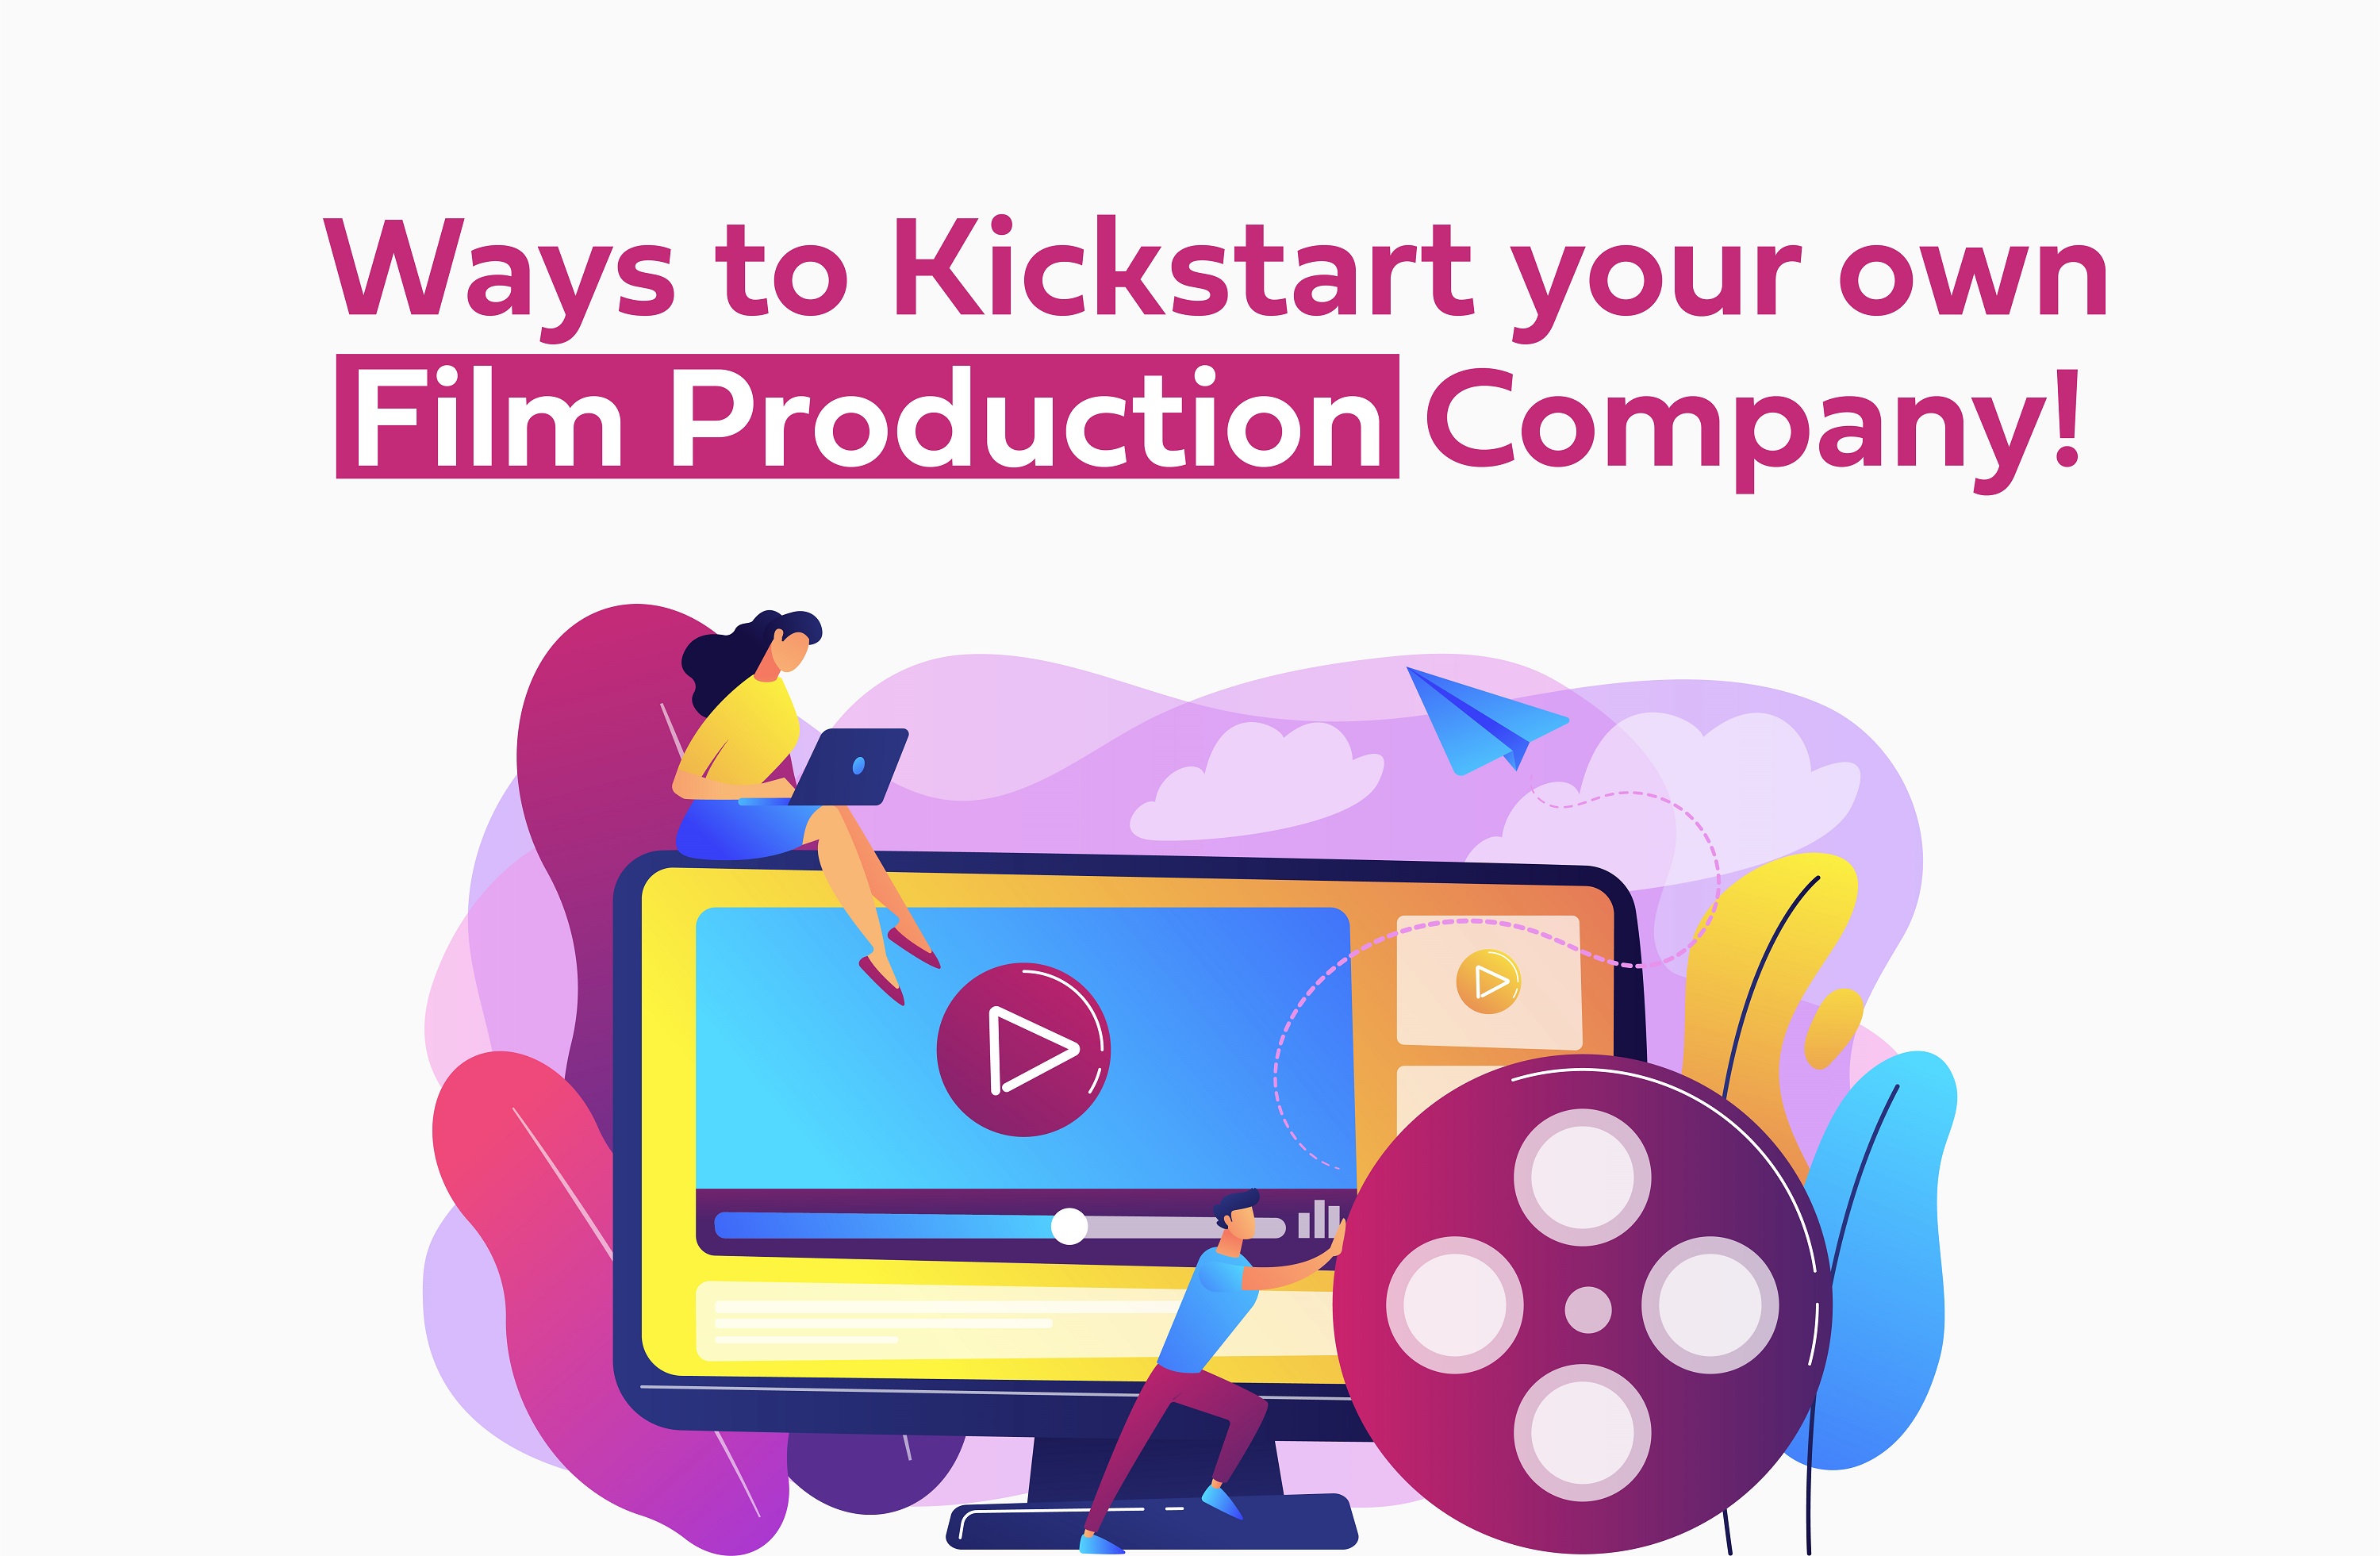 Ways to Kickstart your own Film Production Company